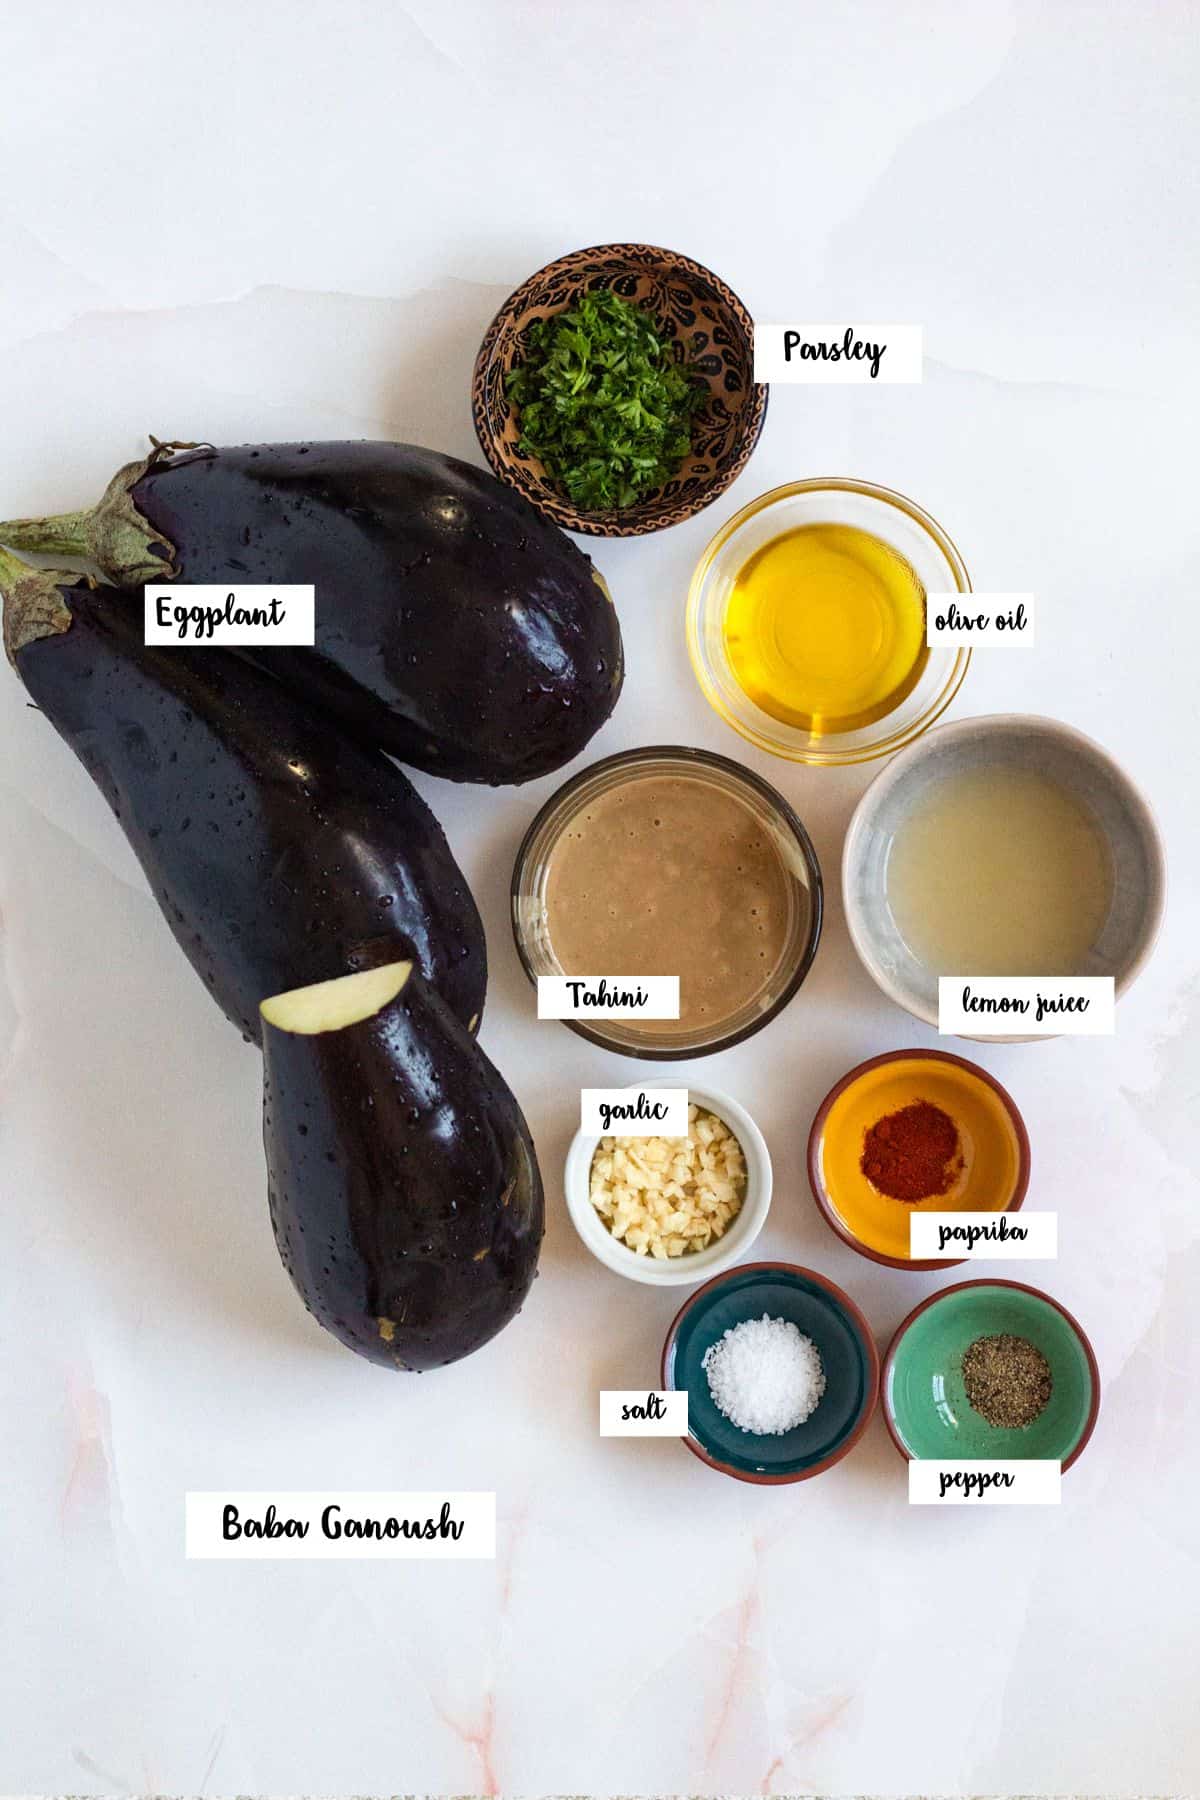 Ingredients shown are used to prepare baba ganoush. 